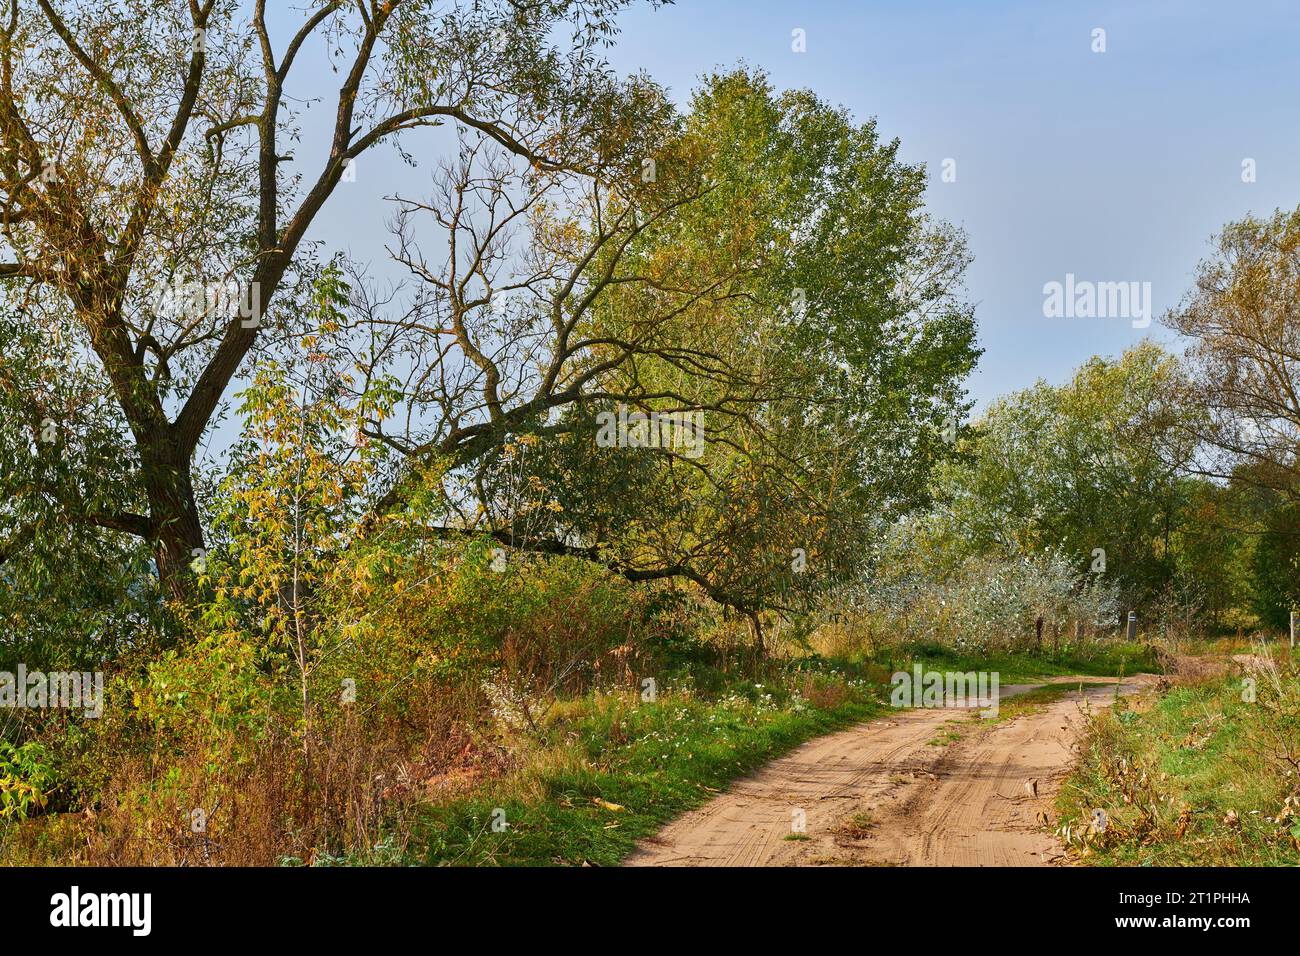 Exploring the serenity of this enchanting dirt road, surrounded by lush trees and vibrant grass. Stock Photo